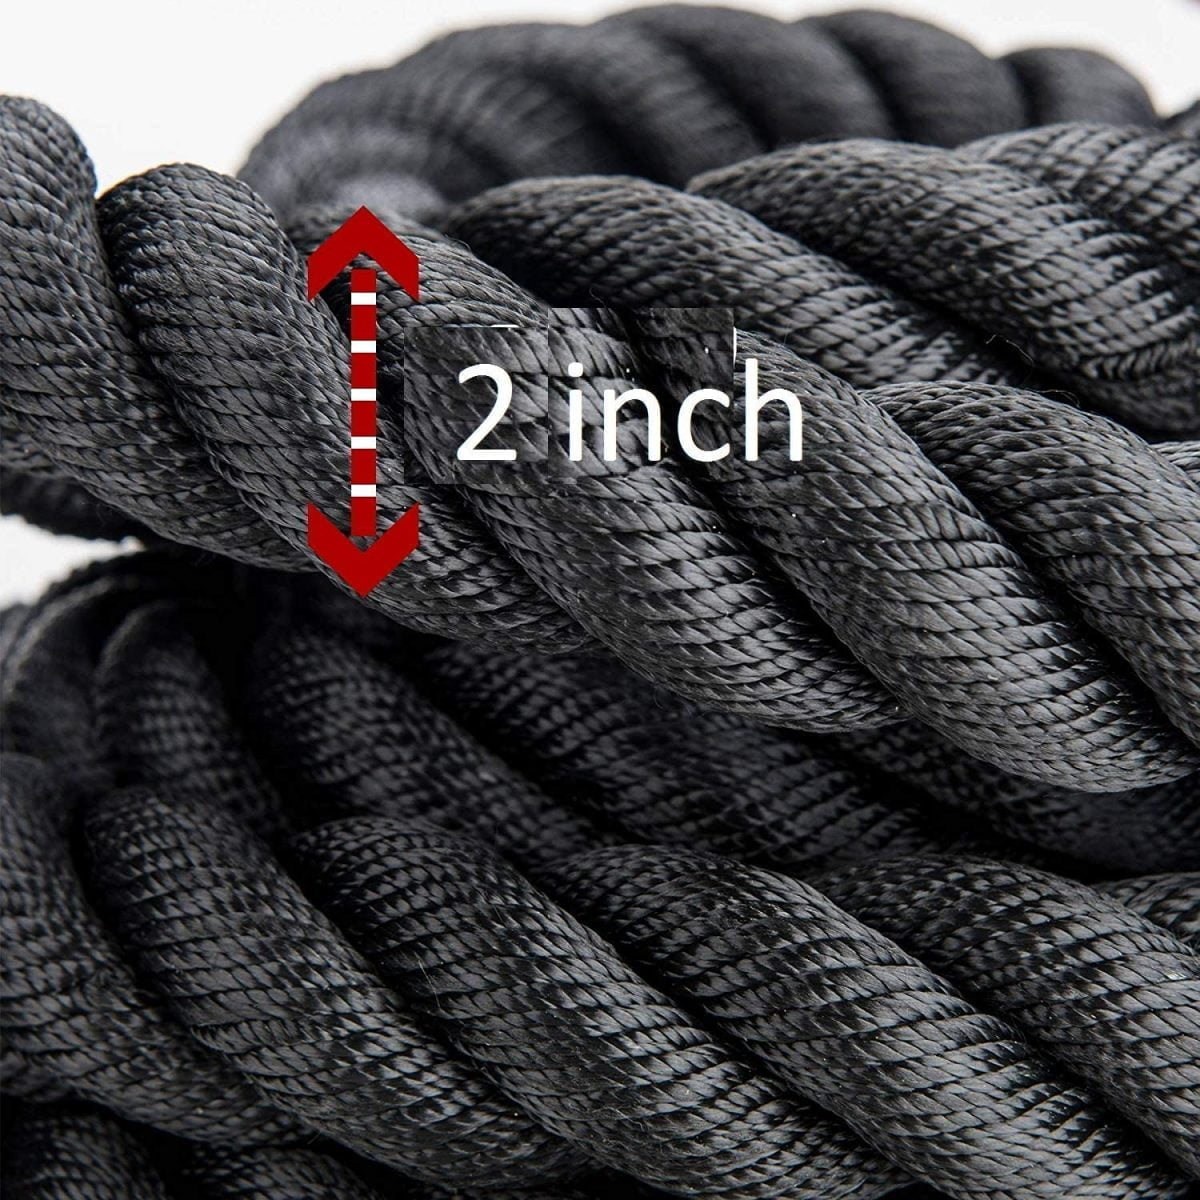 81Ufjthvv8L. Ac Sl1500 Proffessional Battle Rope 15Mtr. X Dia 50Mm Heavy Duty Fitness Ropes Strength Core Training For Strength And Conditioning Workouts Rope Black Gym Professional Battle Rope Gym Professional Battle Rope